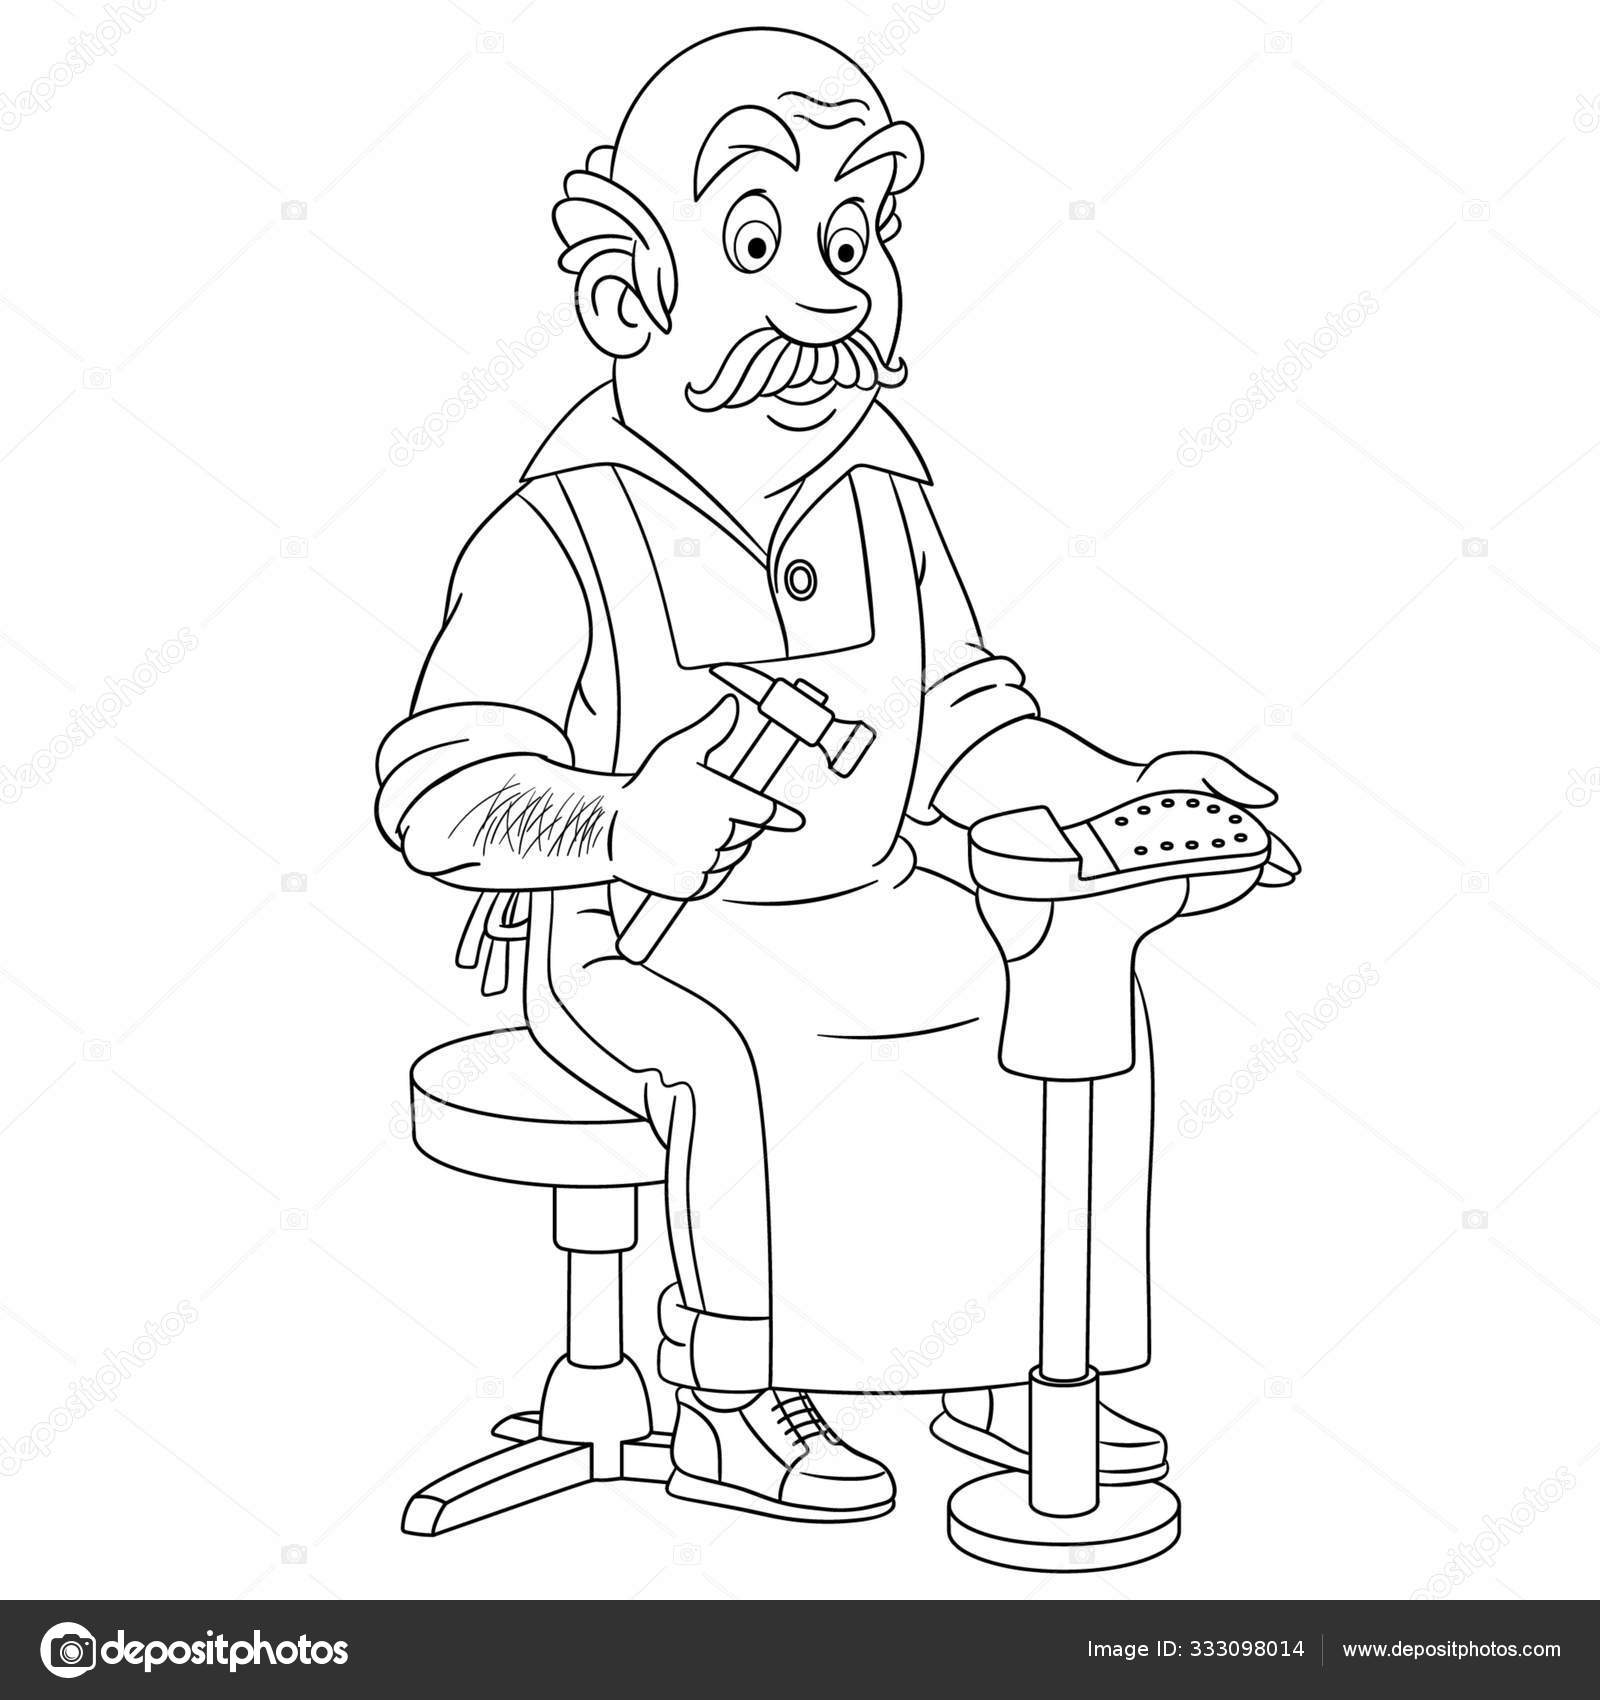 old man coloring page